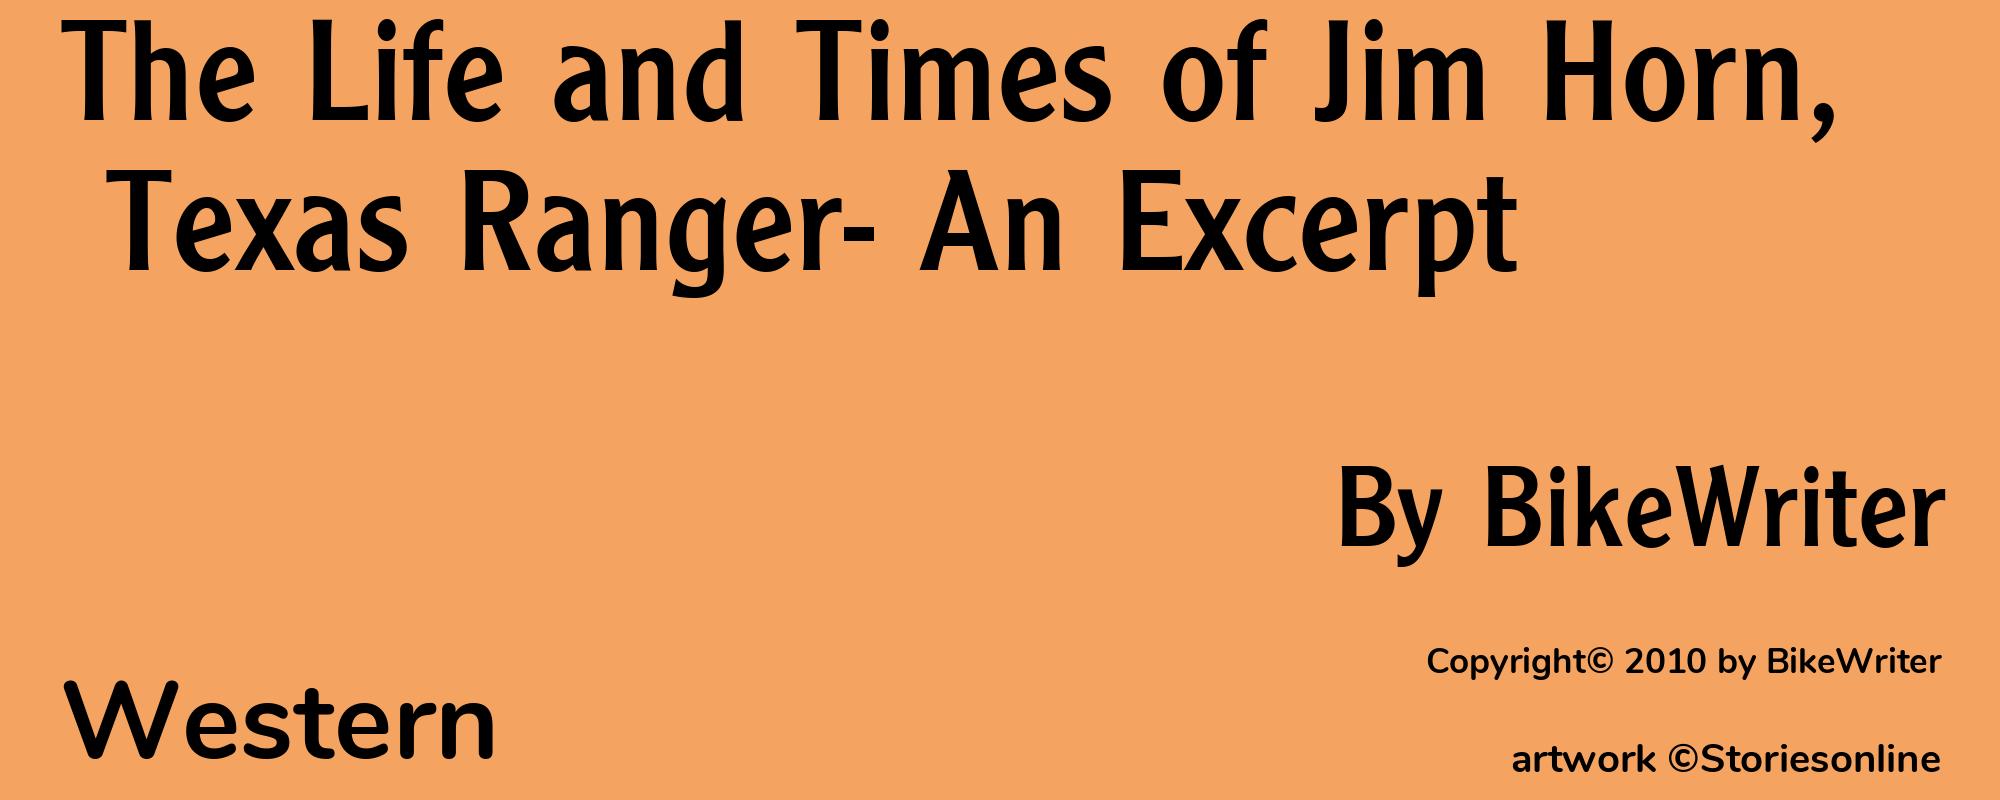 The Life and Times of Jim Horn, Texas Ranger- An Excerpt - Cover